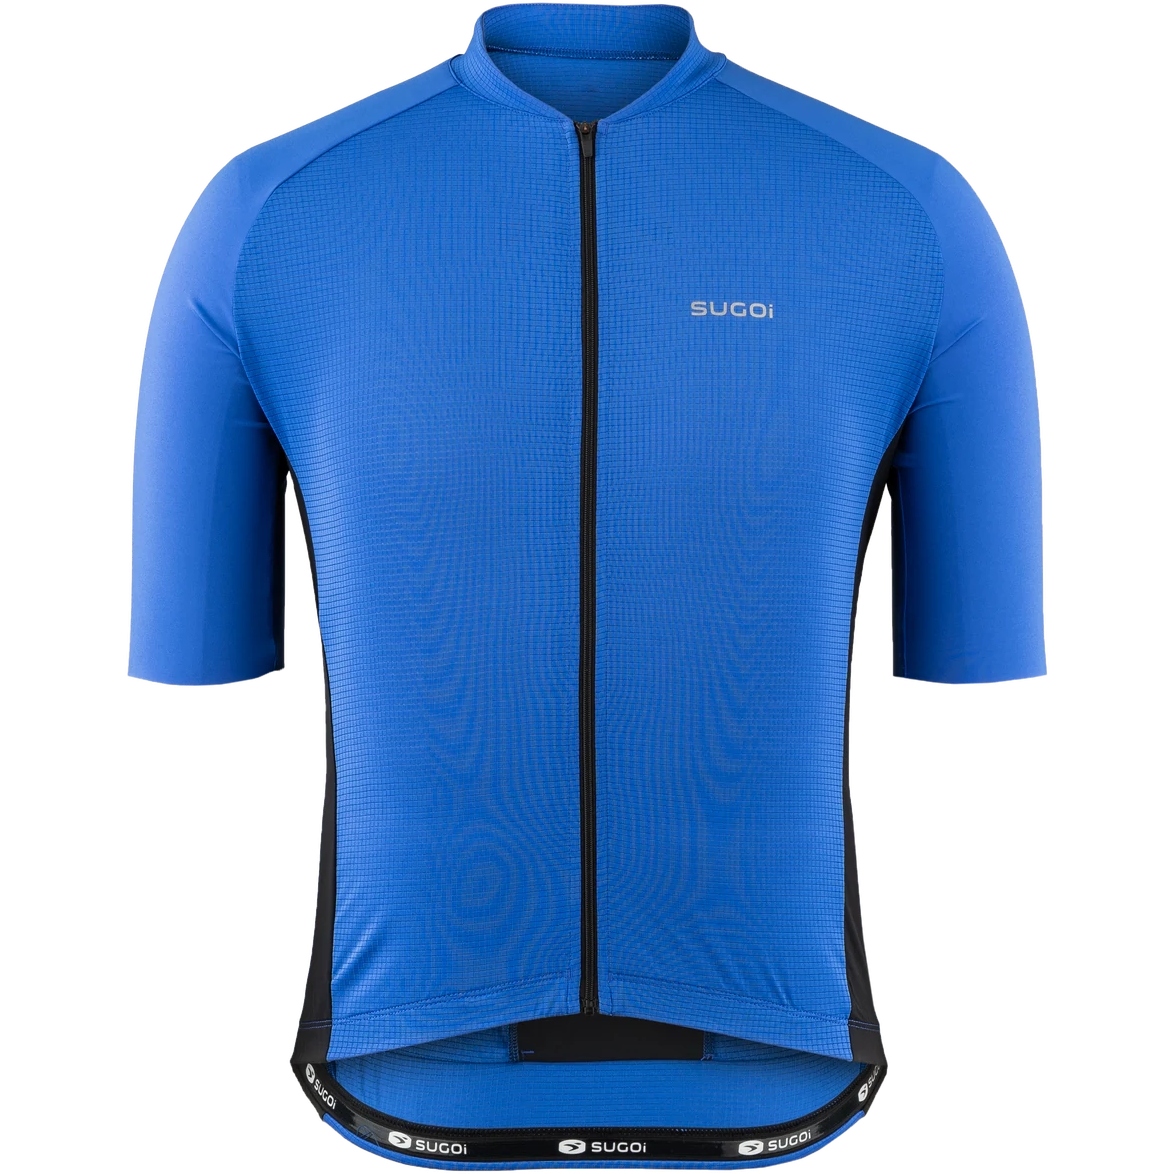 Productfoto van Sugoi Evolution ICE 2 Jersey - dynamic blue